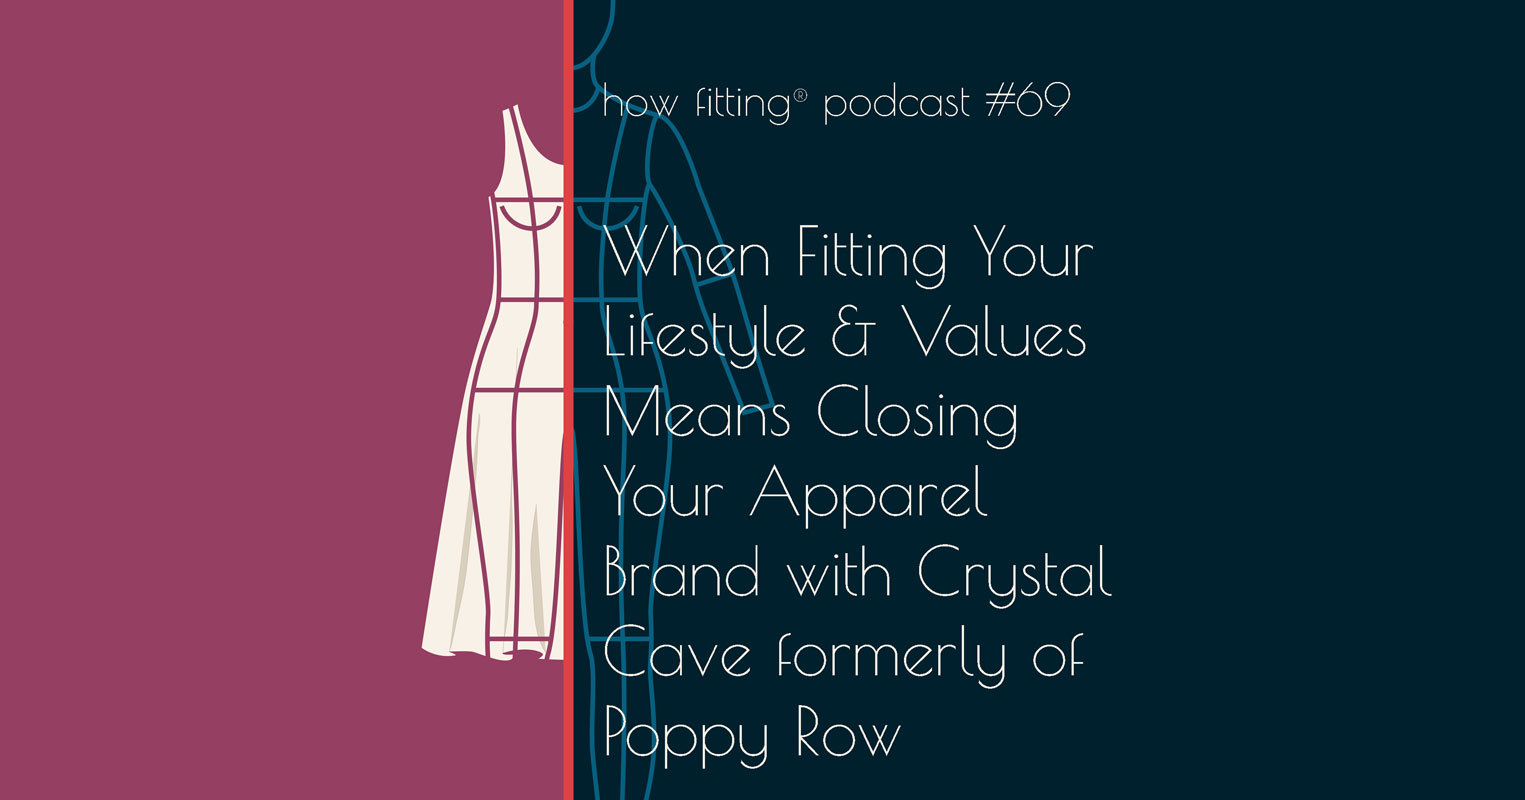 HF#69 When Fitting Your Lifestyle And Values Means Closing Your Apparel  Brand with Crystal Cave formerly of Poppy Row